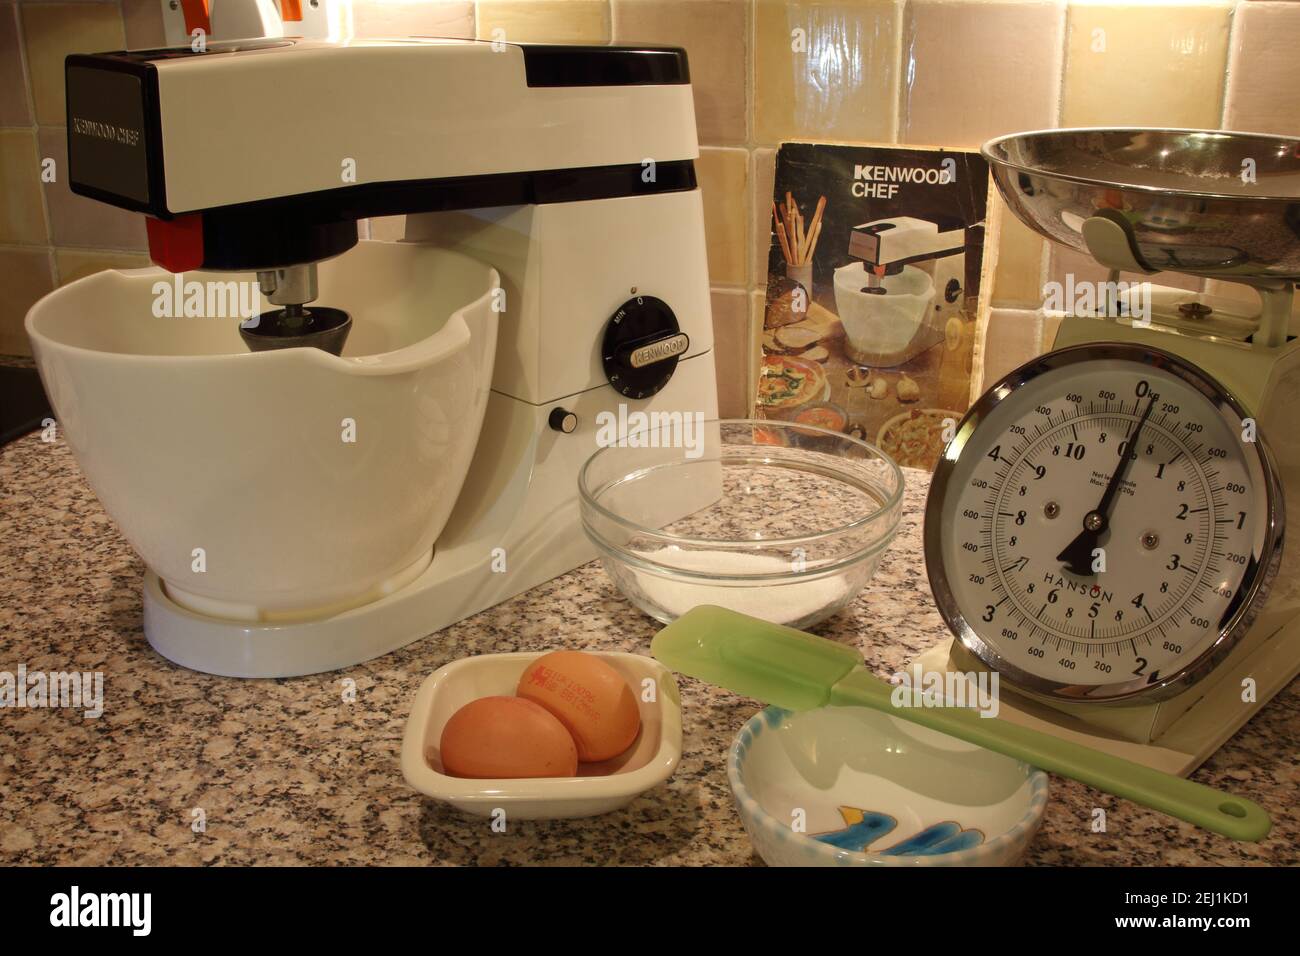 Kenwood chef hi-res stock photography and images - Alamy